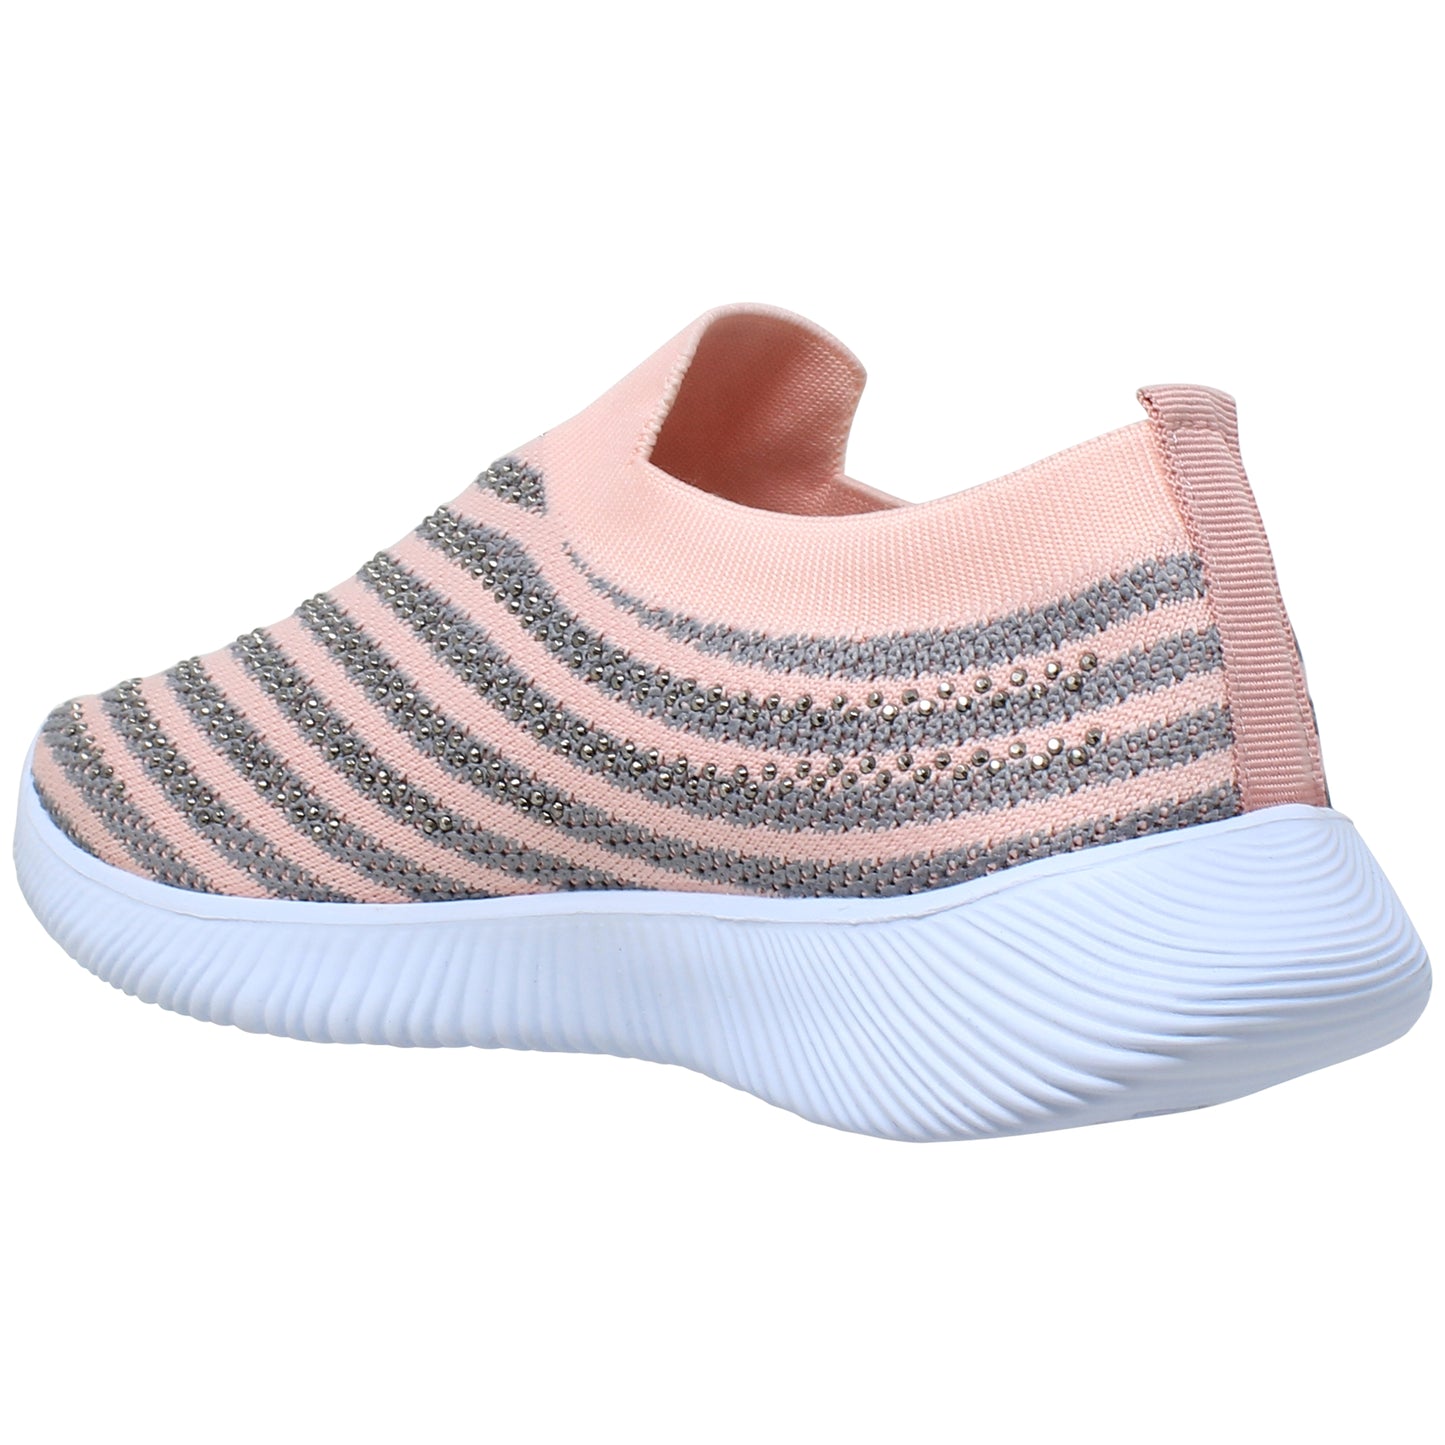 SOBEYO Women's Sneakers Running Shoes Rhinestone Strips Accent Pink